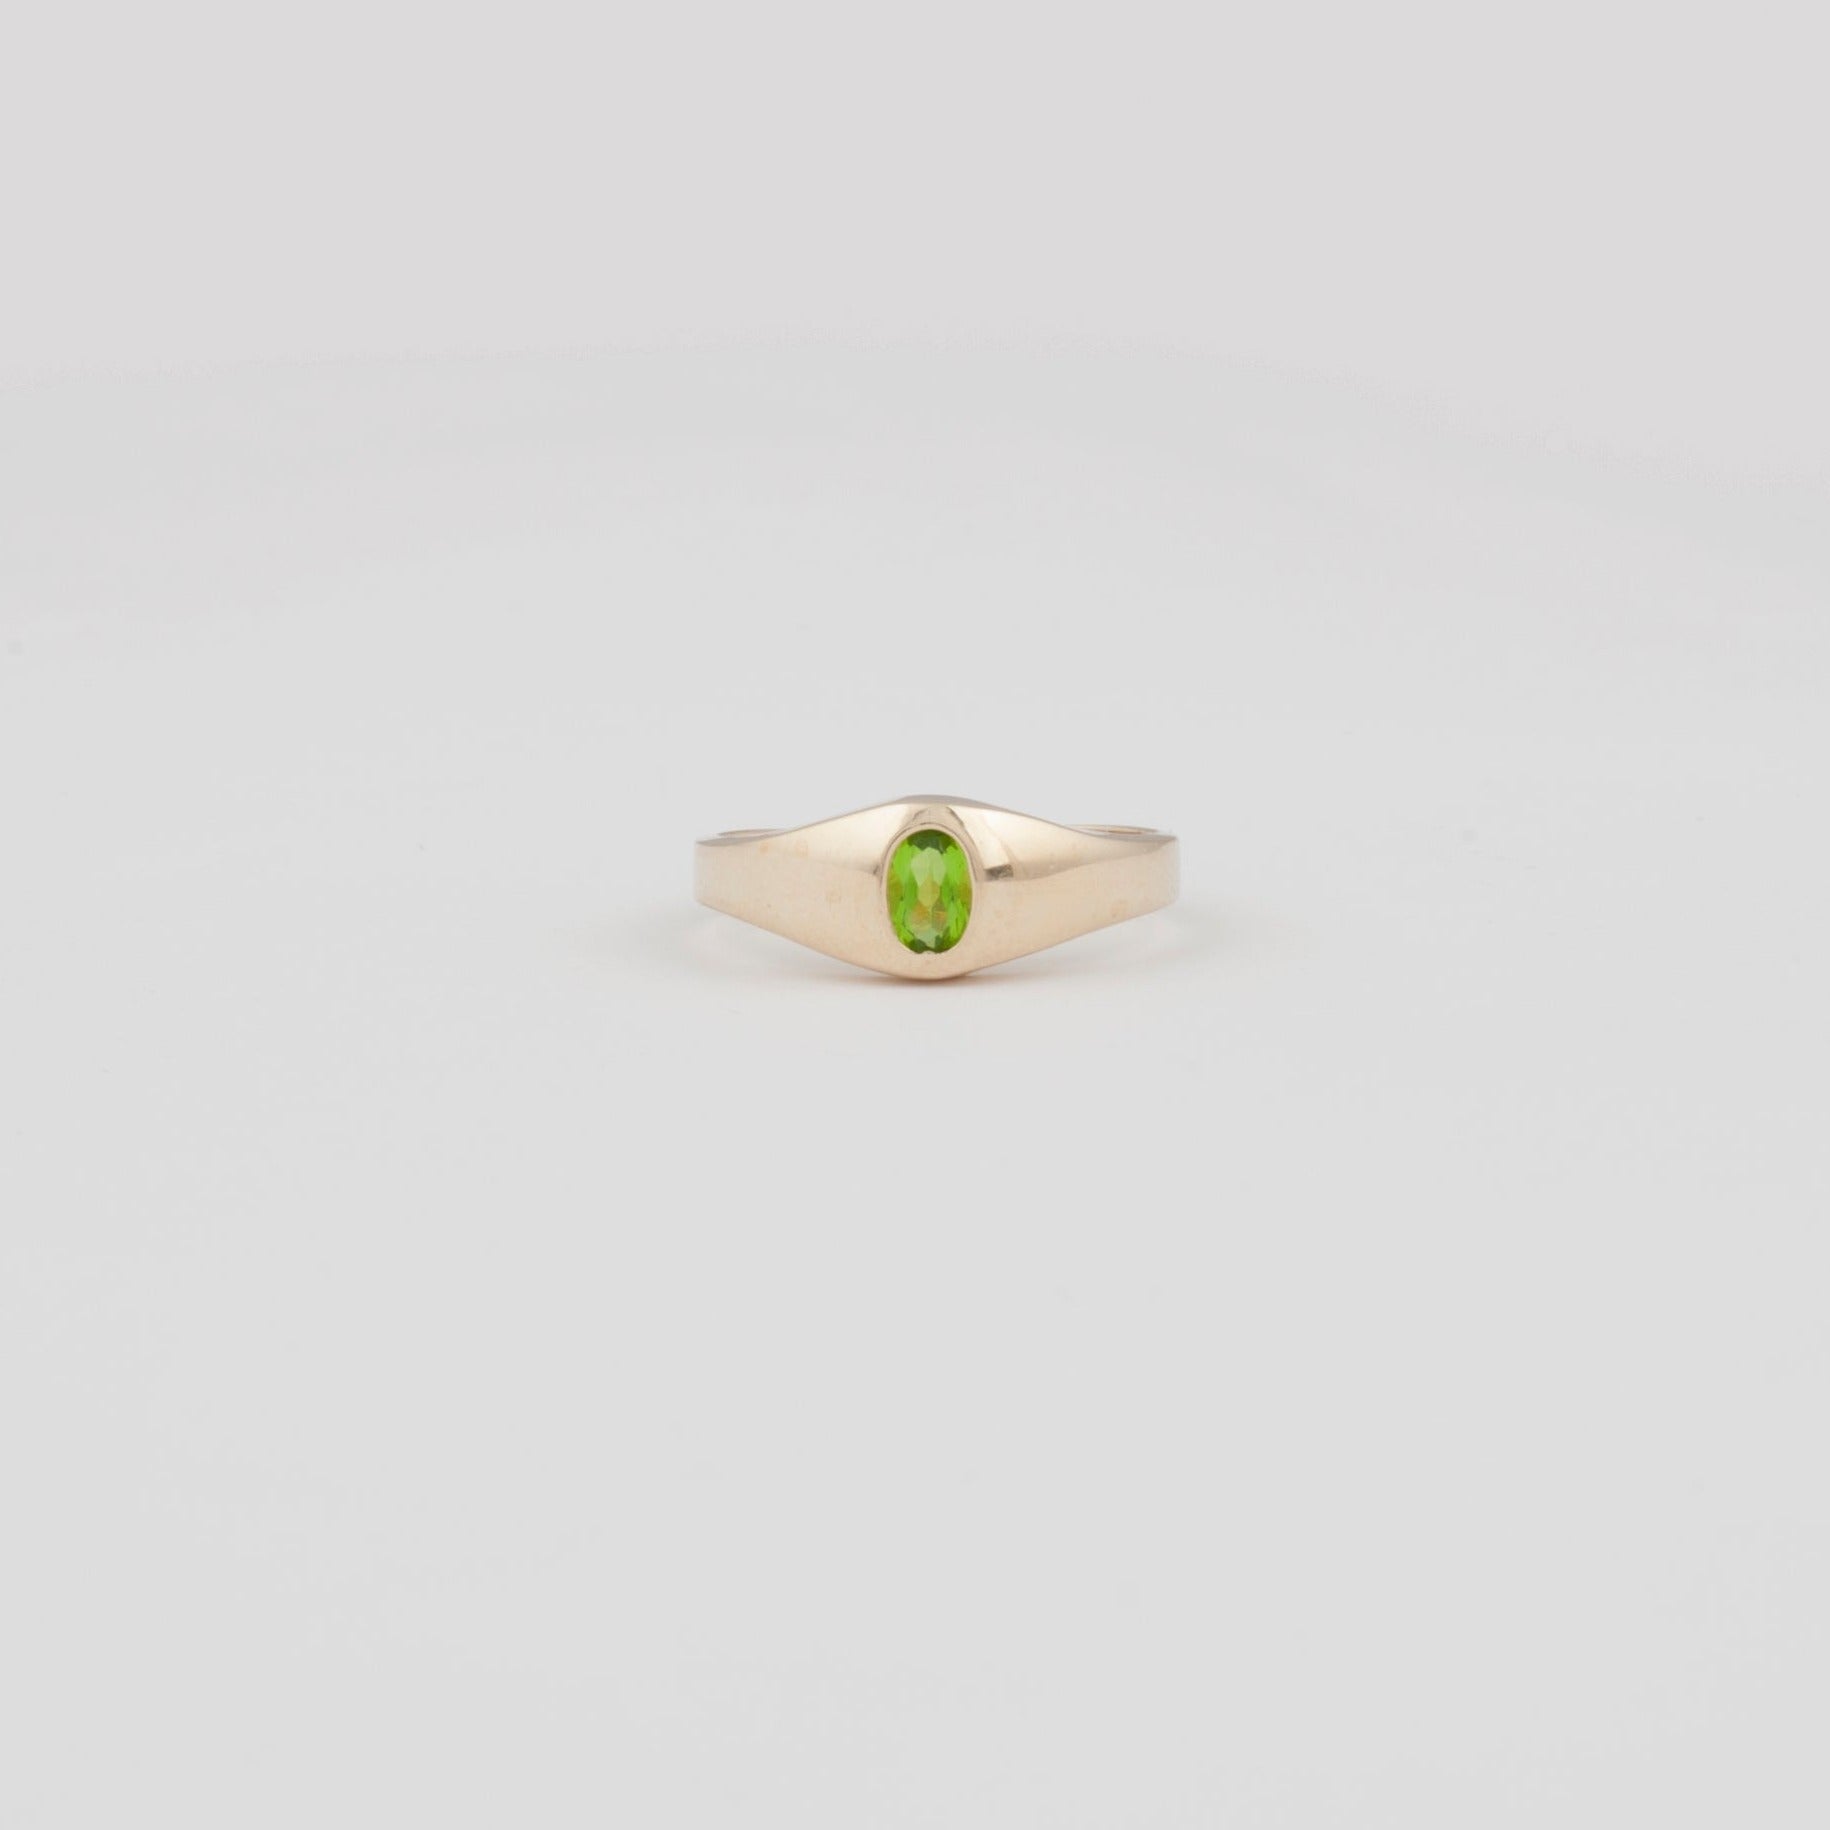 Small gold Ring with Birthstone Inset